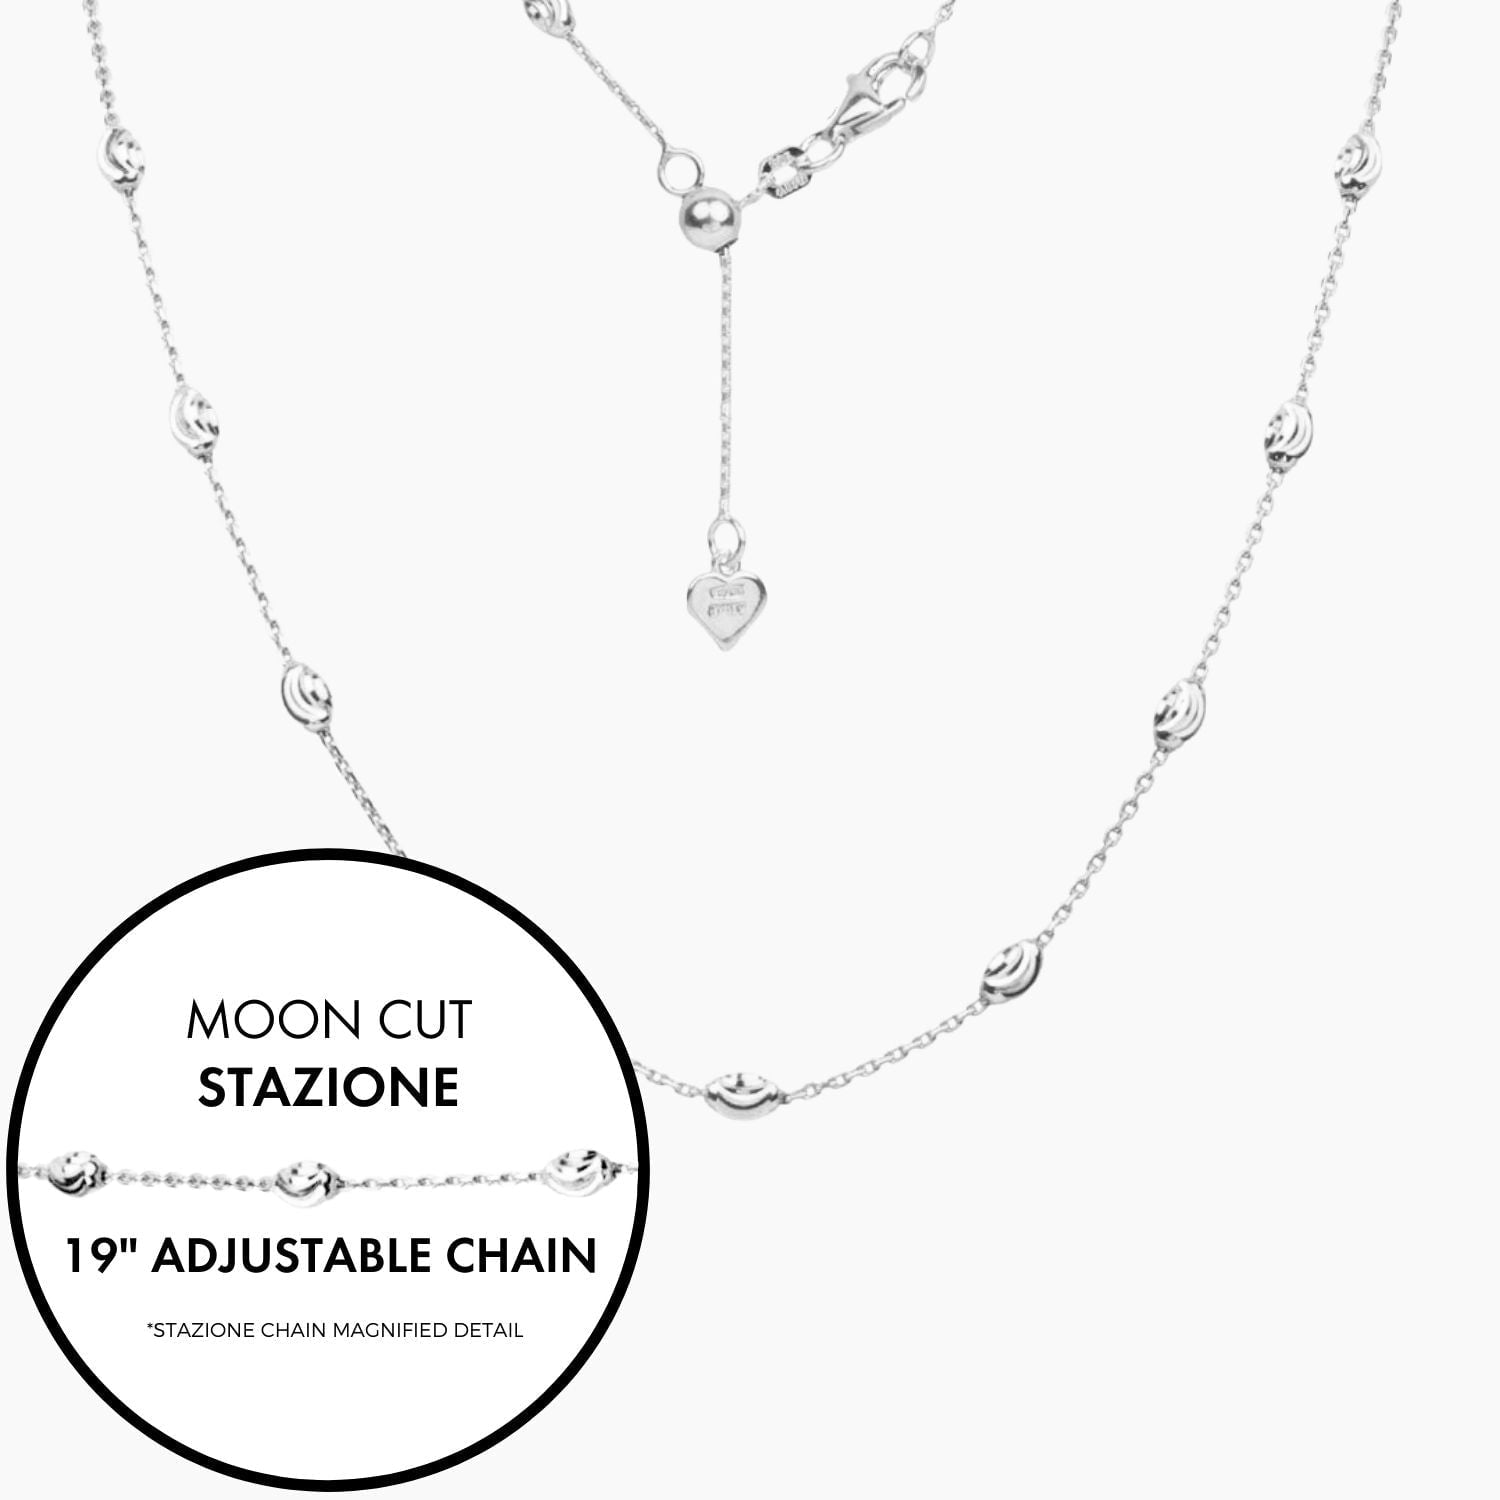 Dainty Sterling Silver Necklace With A Swarovski Drop Bead 